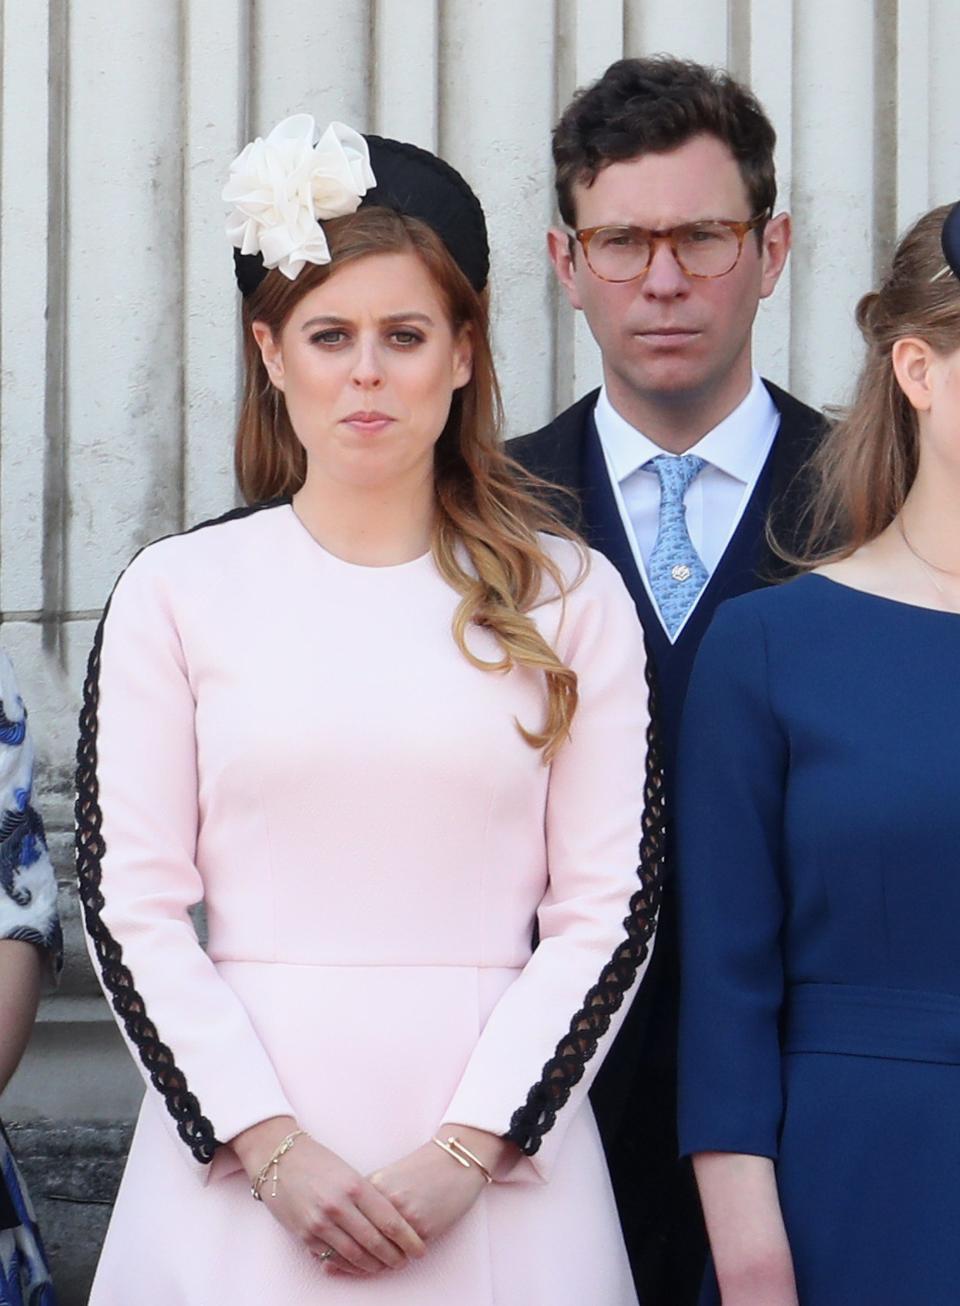 Princess Beatrice wears a pale pink dress with black lace on the sleeves